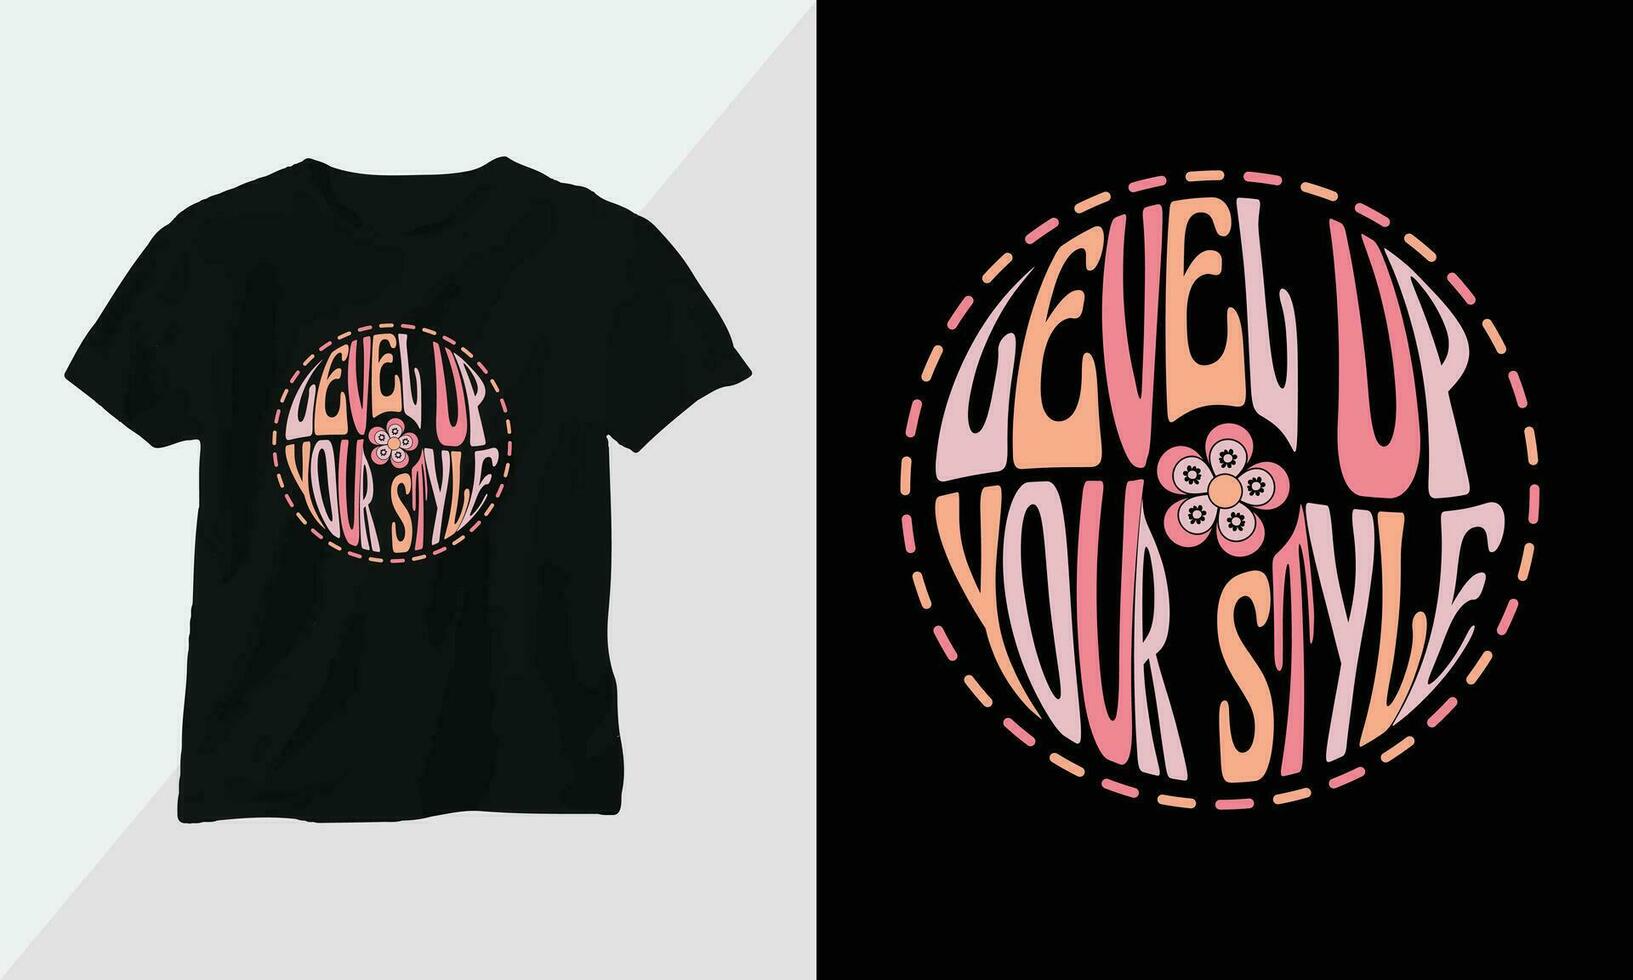 Level up your style - Retro Groovy Inspirational T-shirt Design with retro style vector